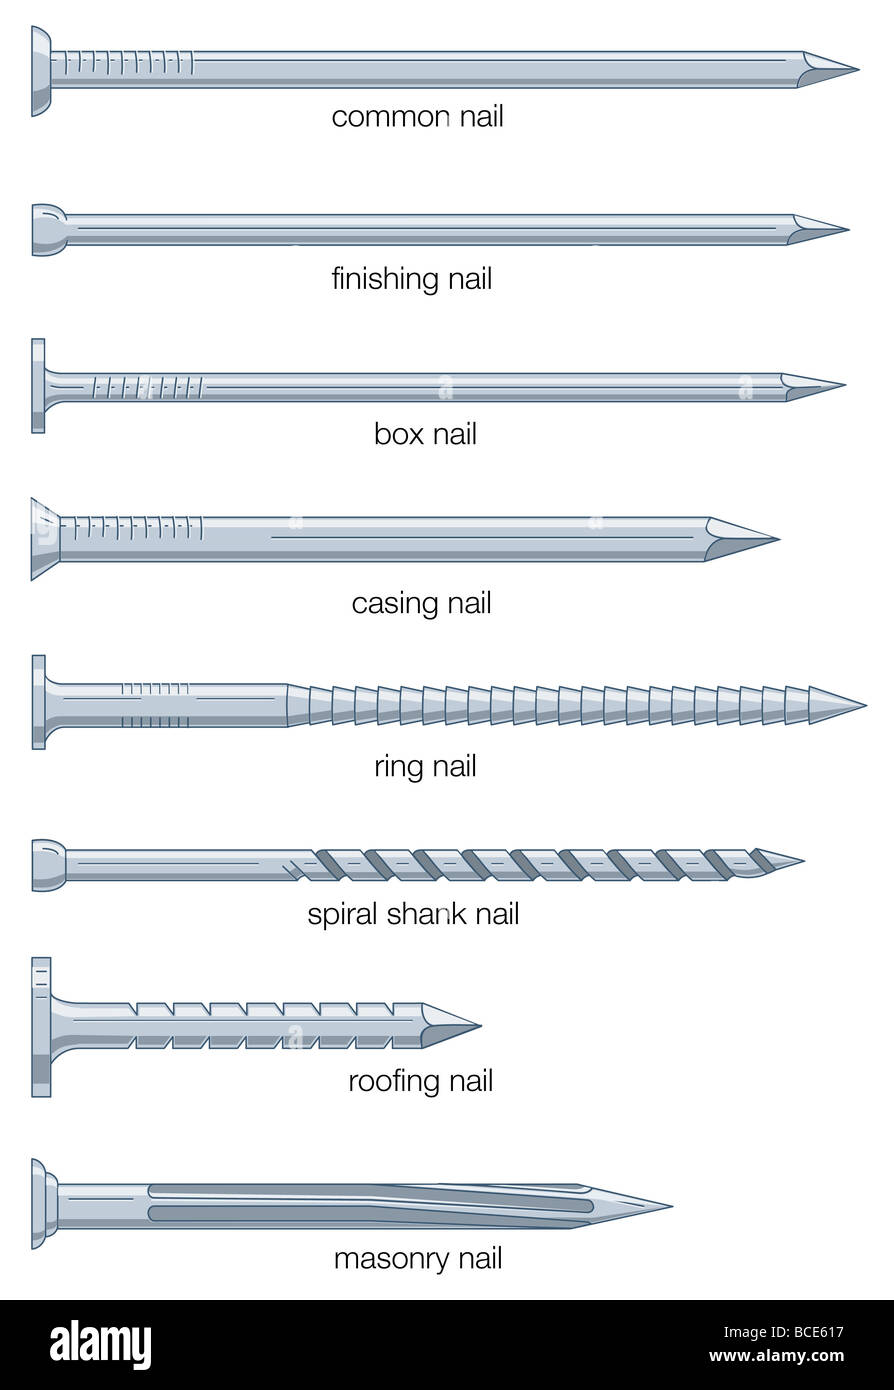 Types Of Nails And Their Uses